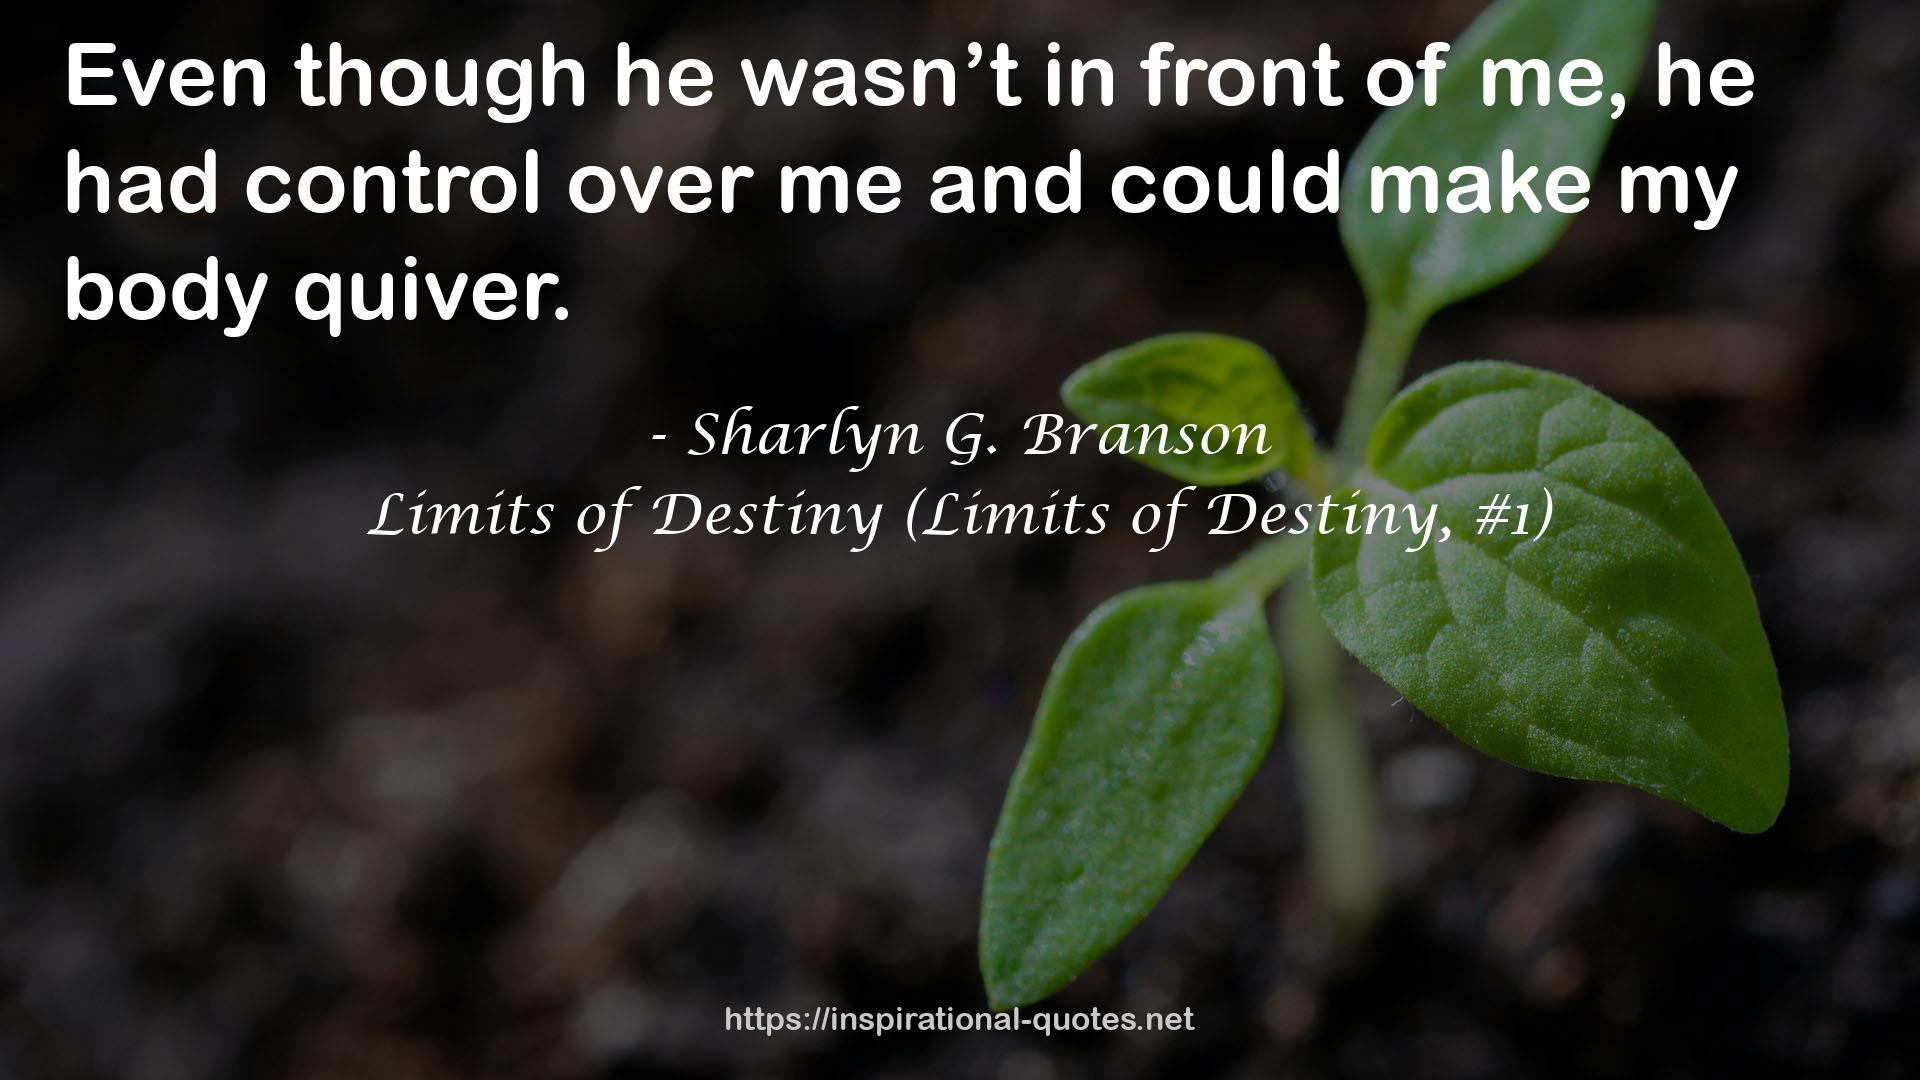 Sharlyn G. Branson QUOTES